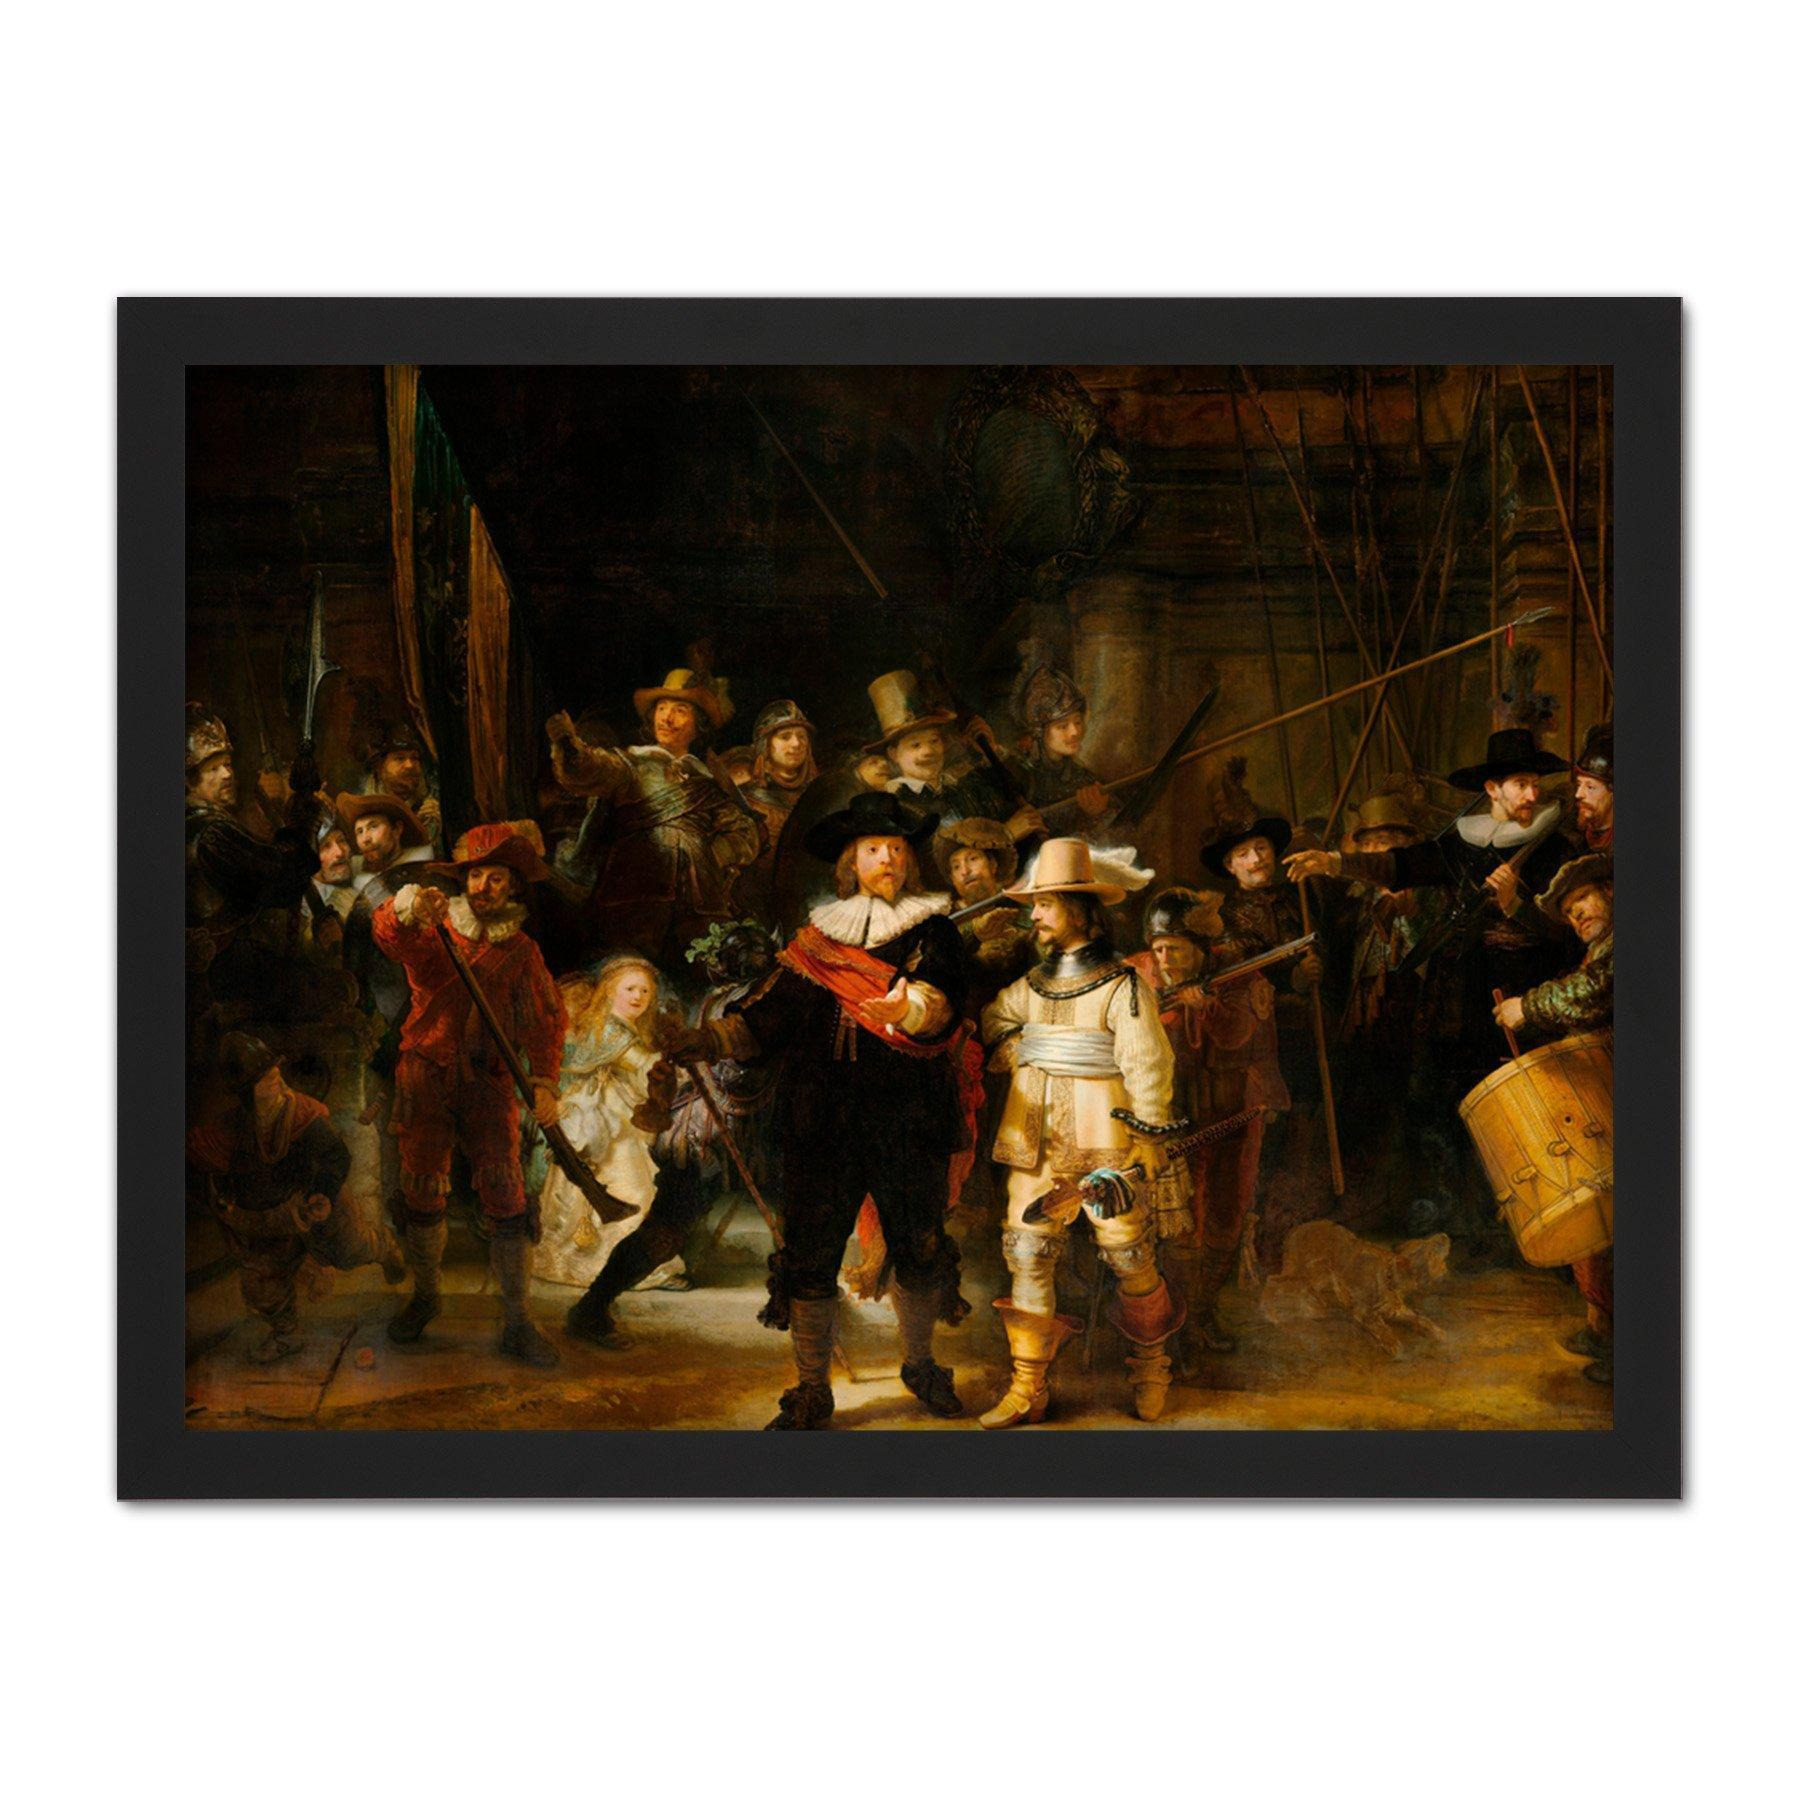 Rembrandt Night Watch Scene The Shooting Company Large Framed Wall Décor Art Print - image 1